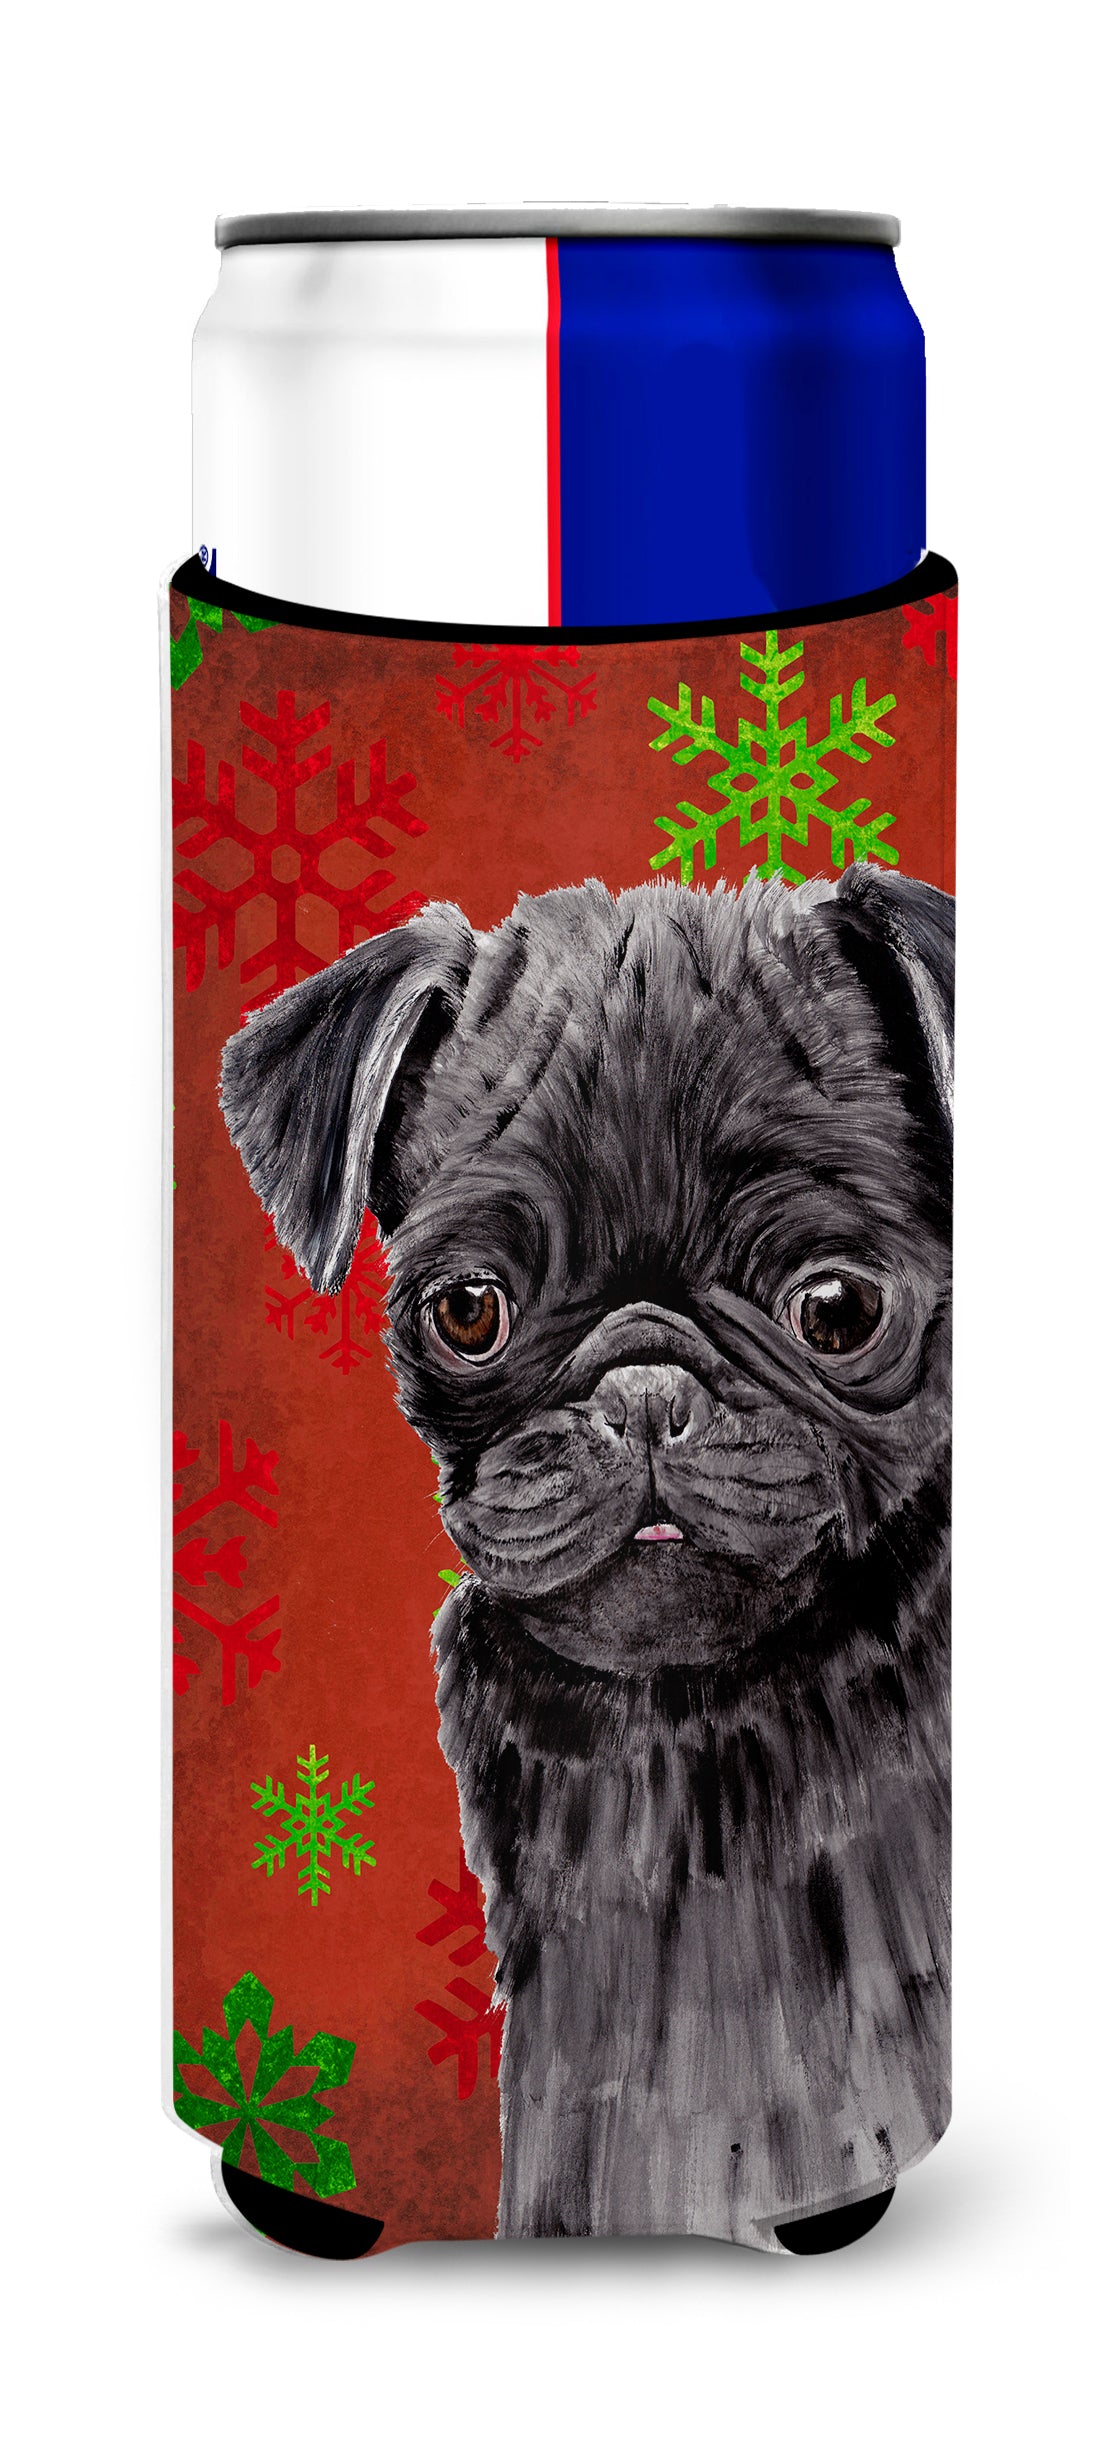 Pug Red and Green Snowflakes Holiday Christmas Ultra Beverage Insulators for slim cans SC9406MUK.